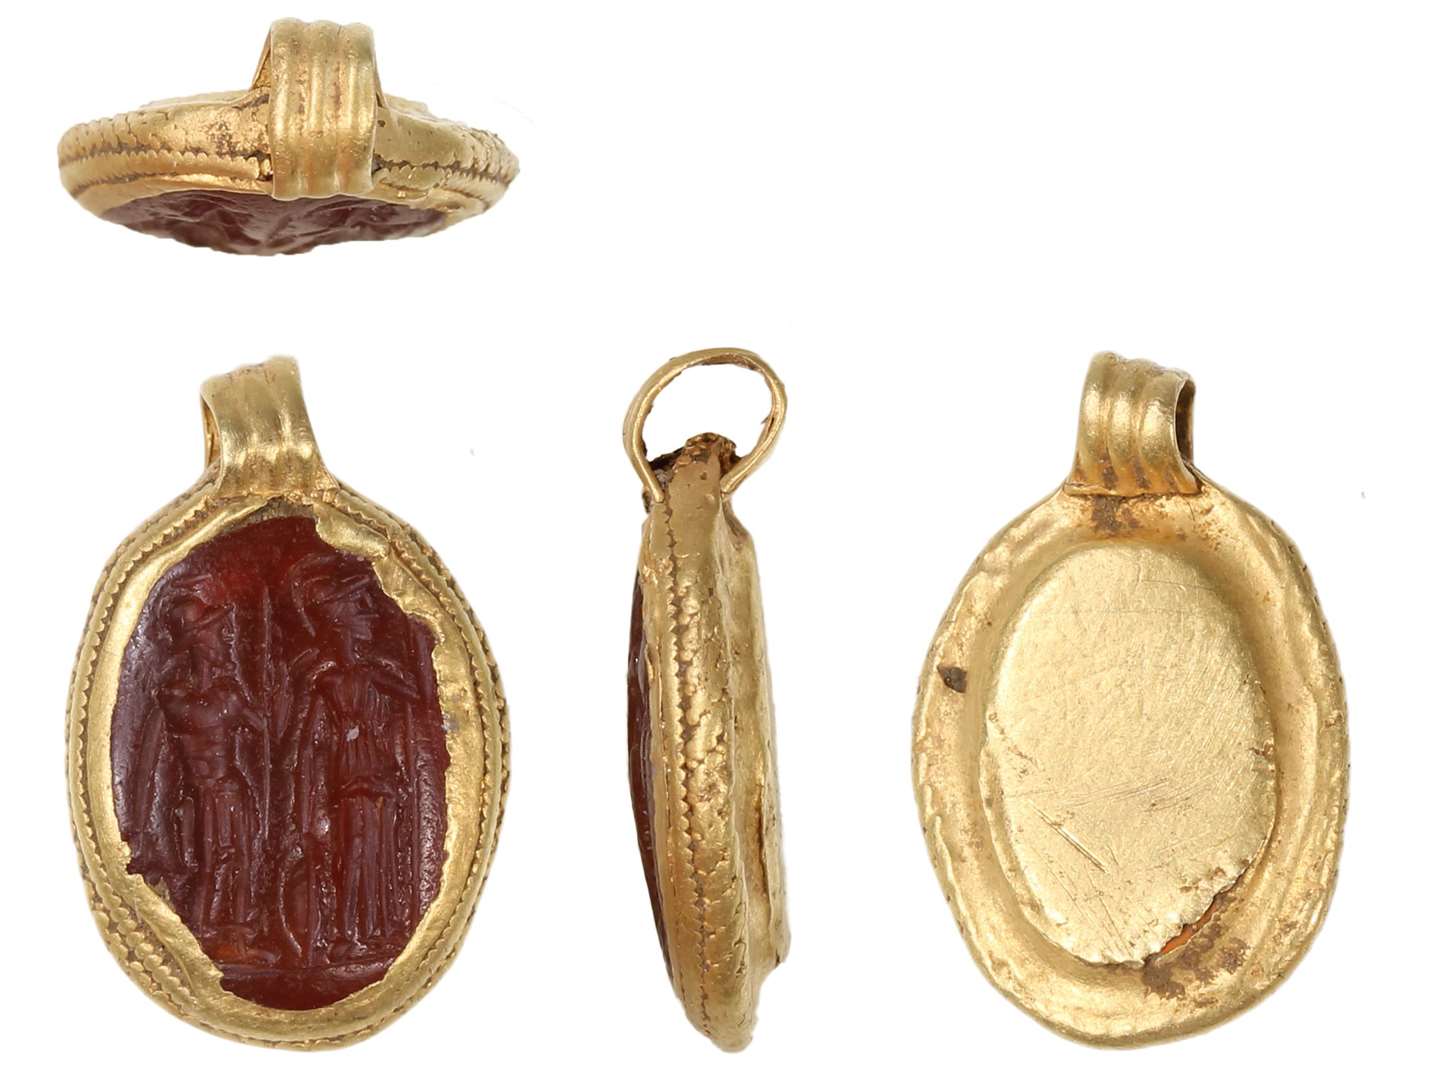 The Anglo Saxon pendant was found in August 2018 (12332989)